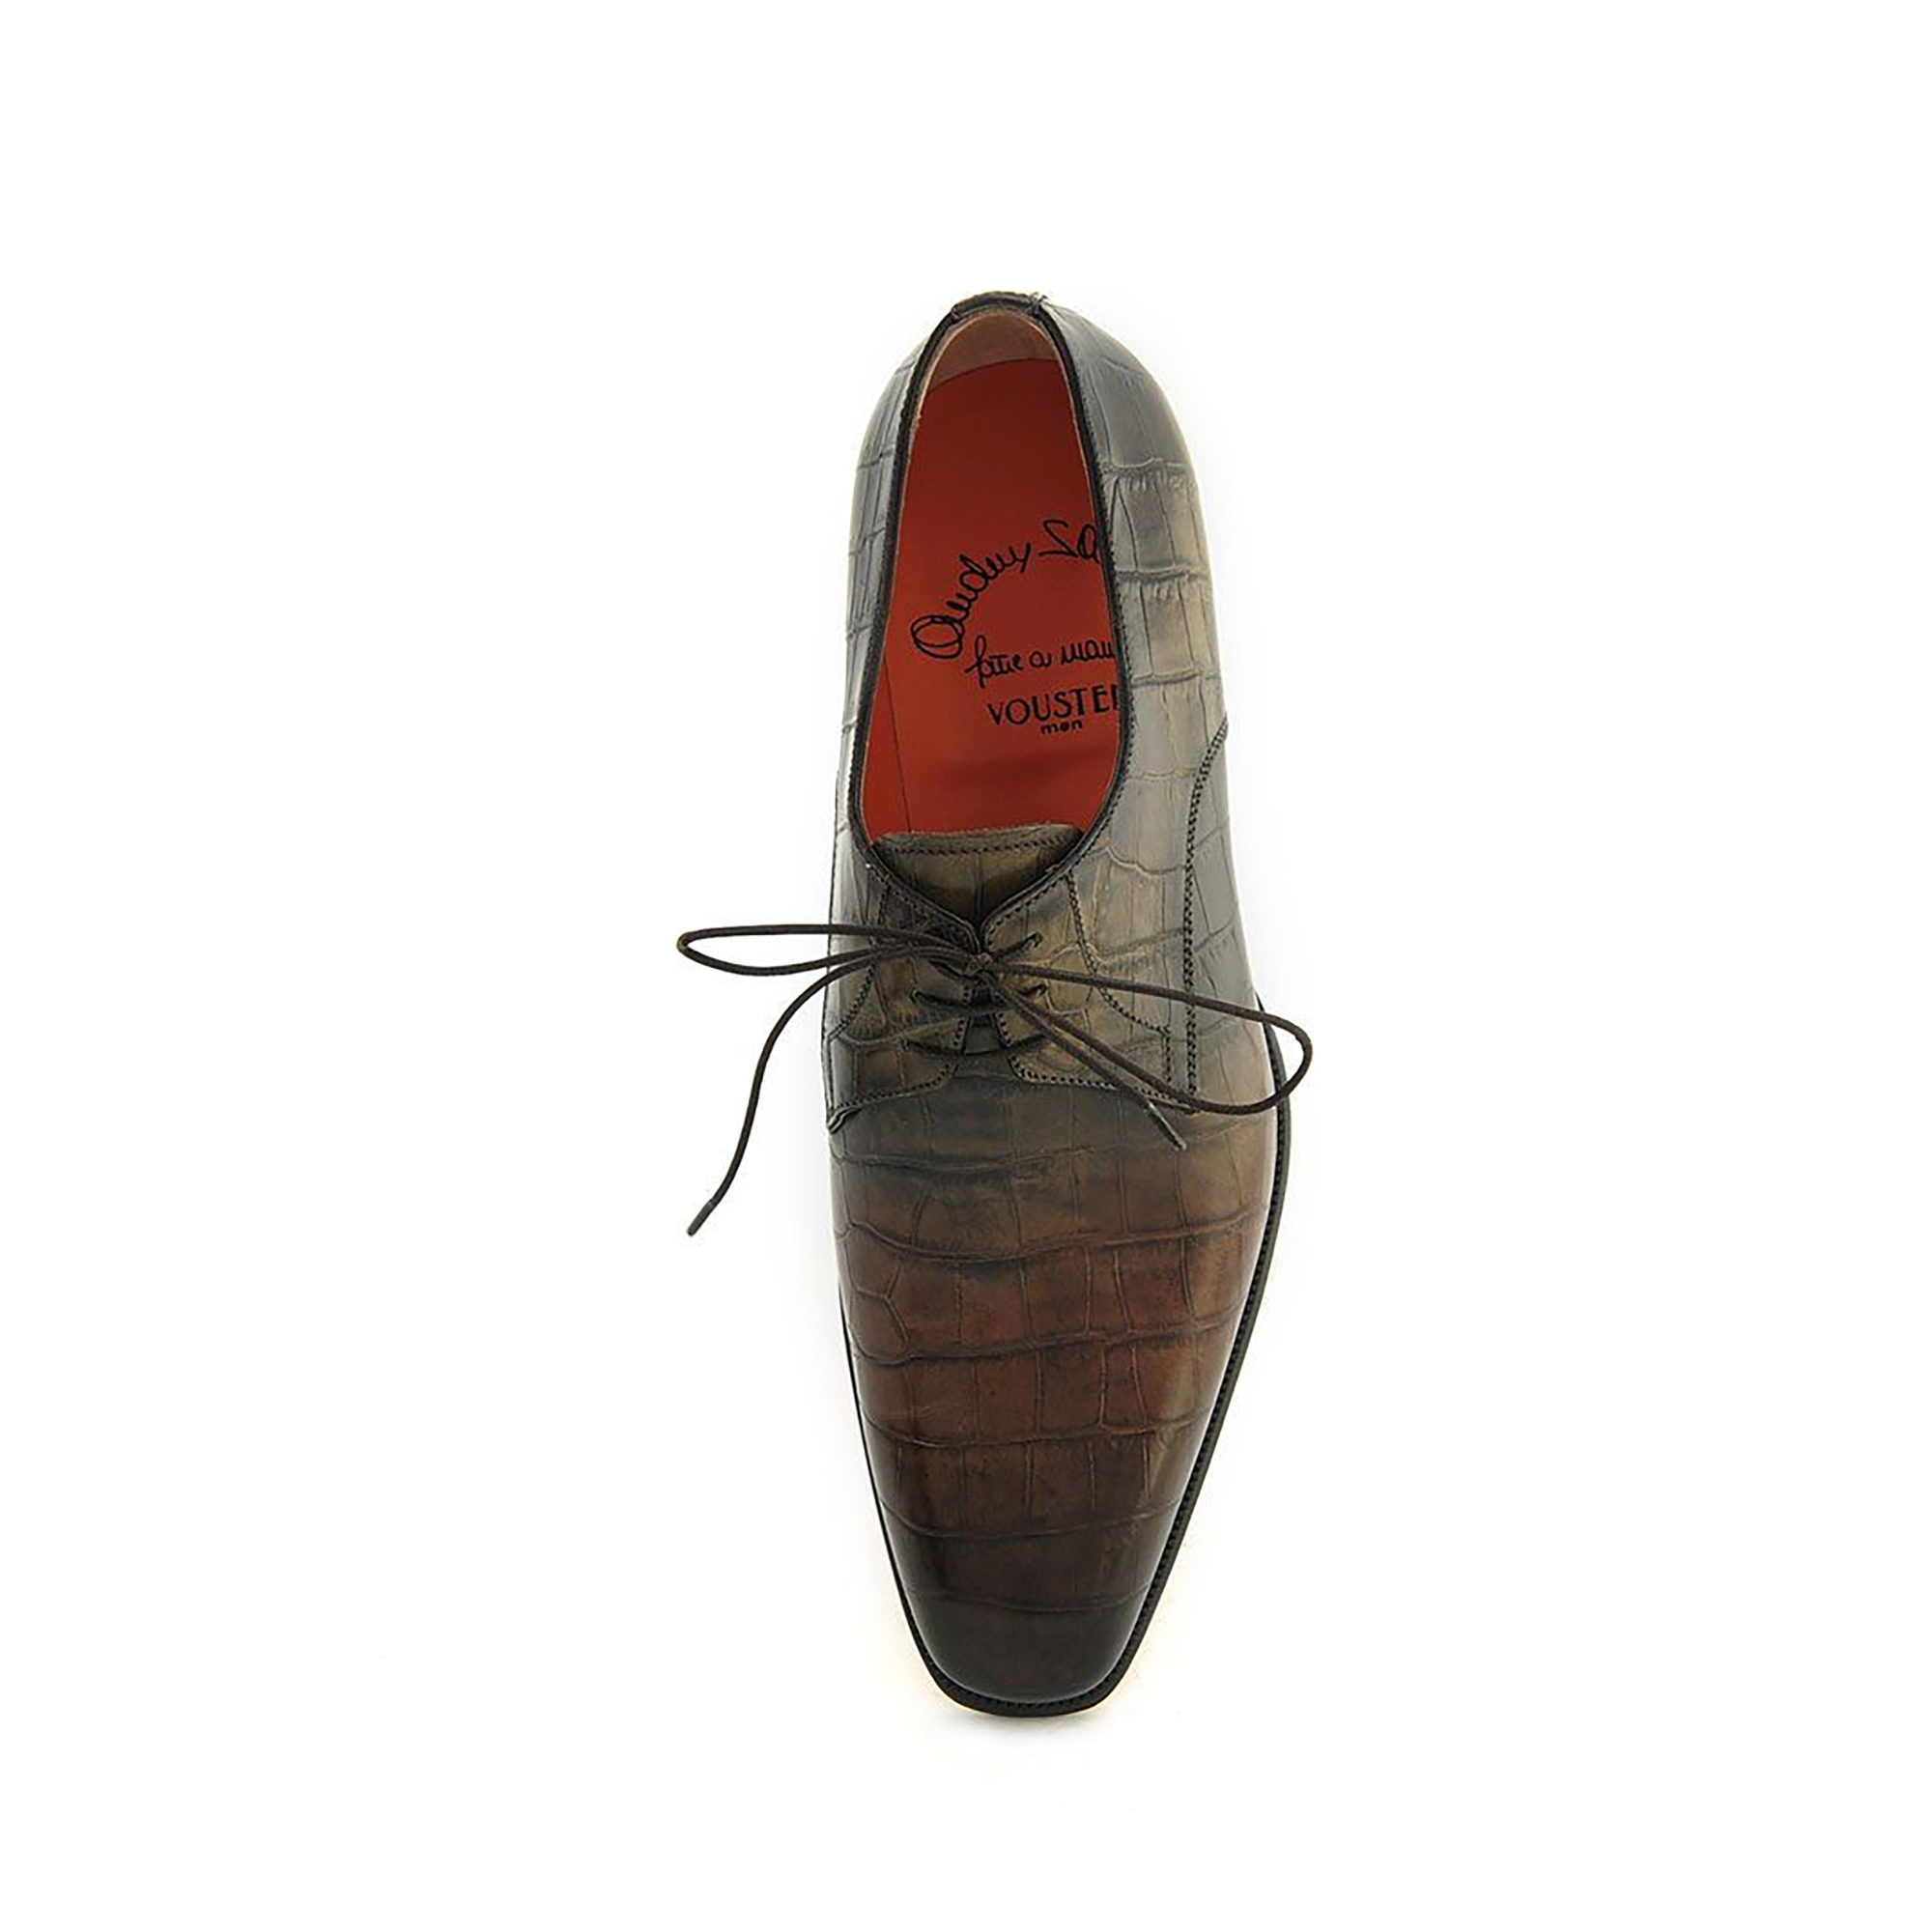 BERLUTI Outlet Alessio Padova Venezia Leather Oxford Shoes save up to 55%  today